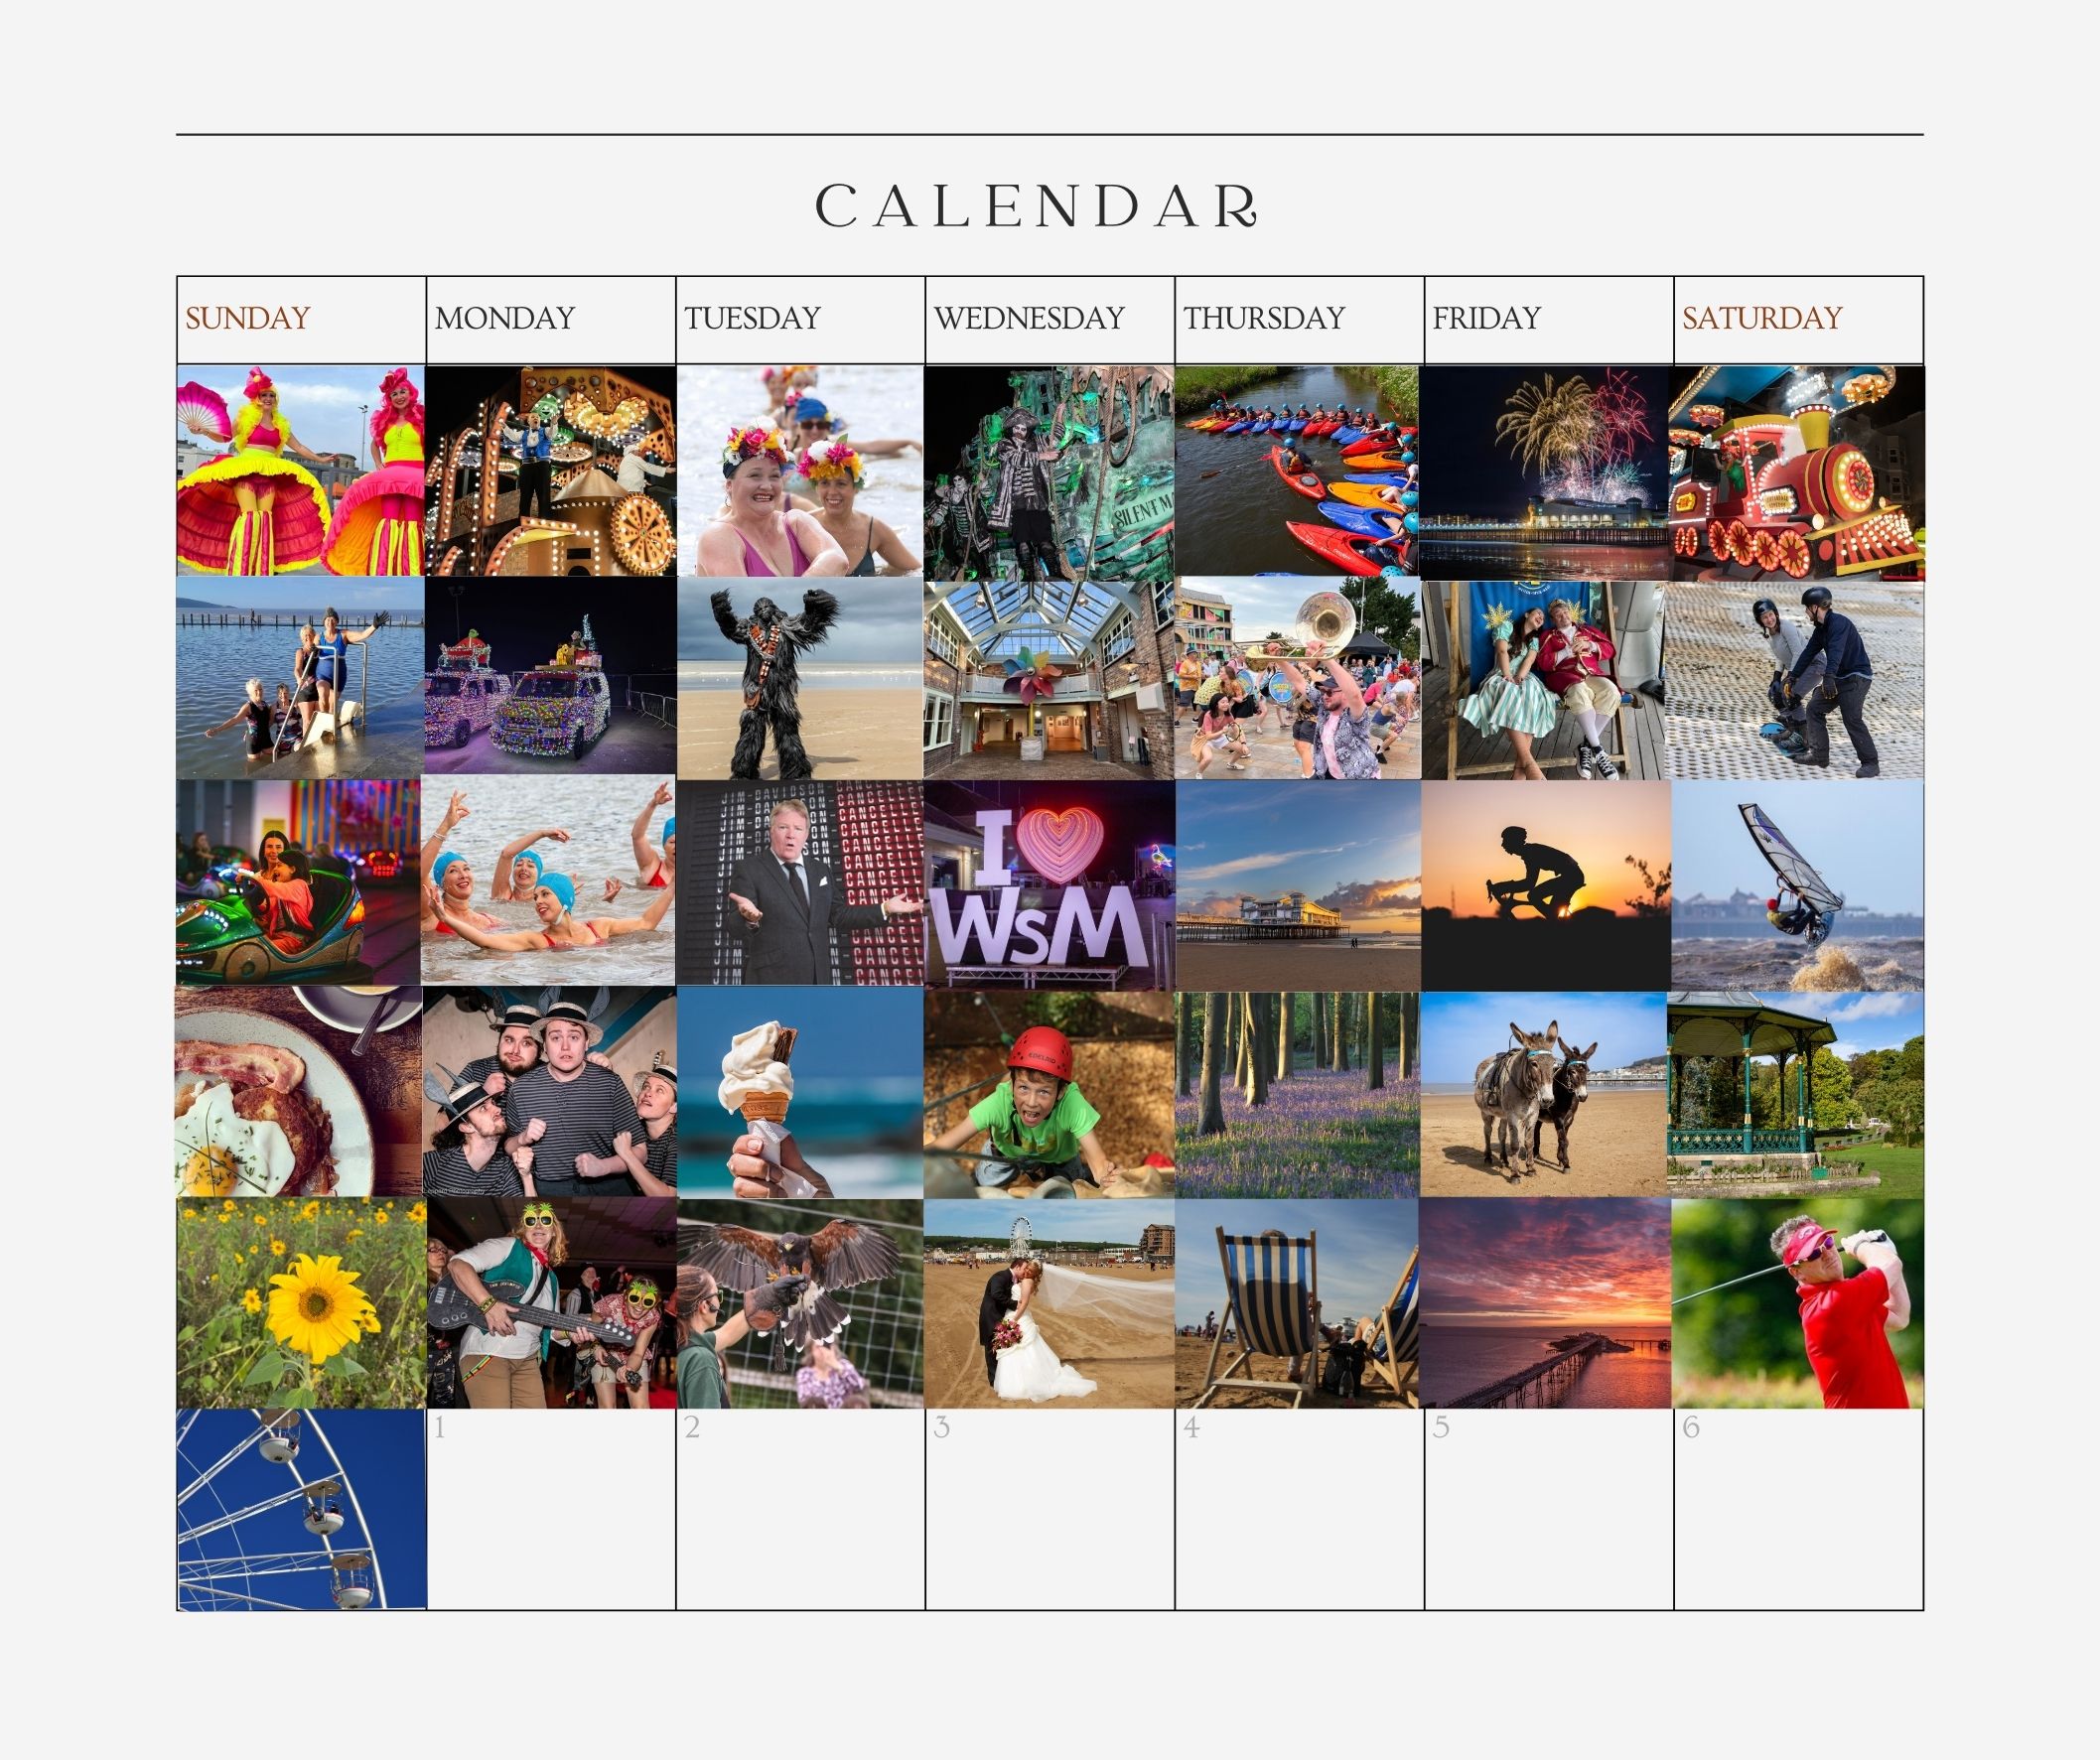 Calendar grid with colour photos in the date squares